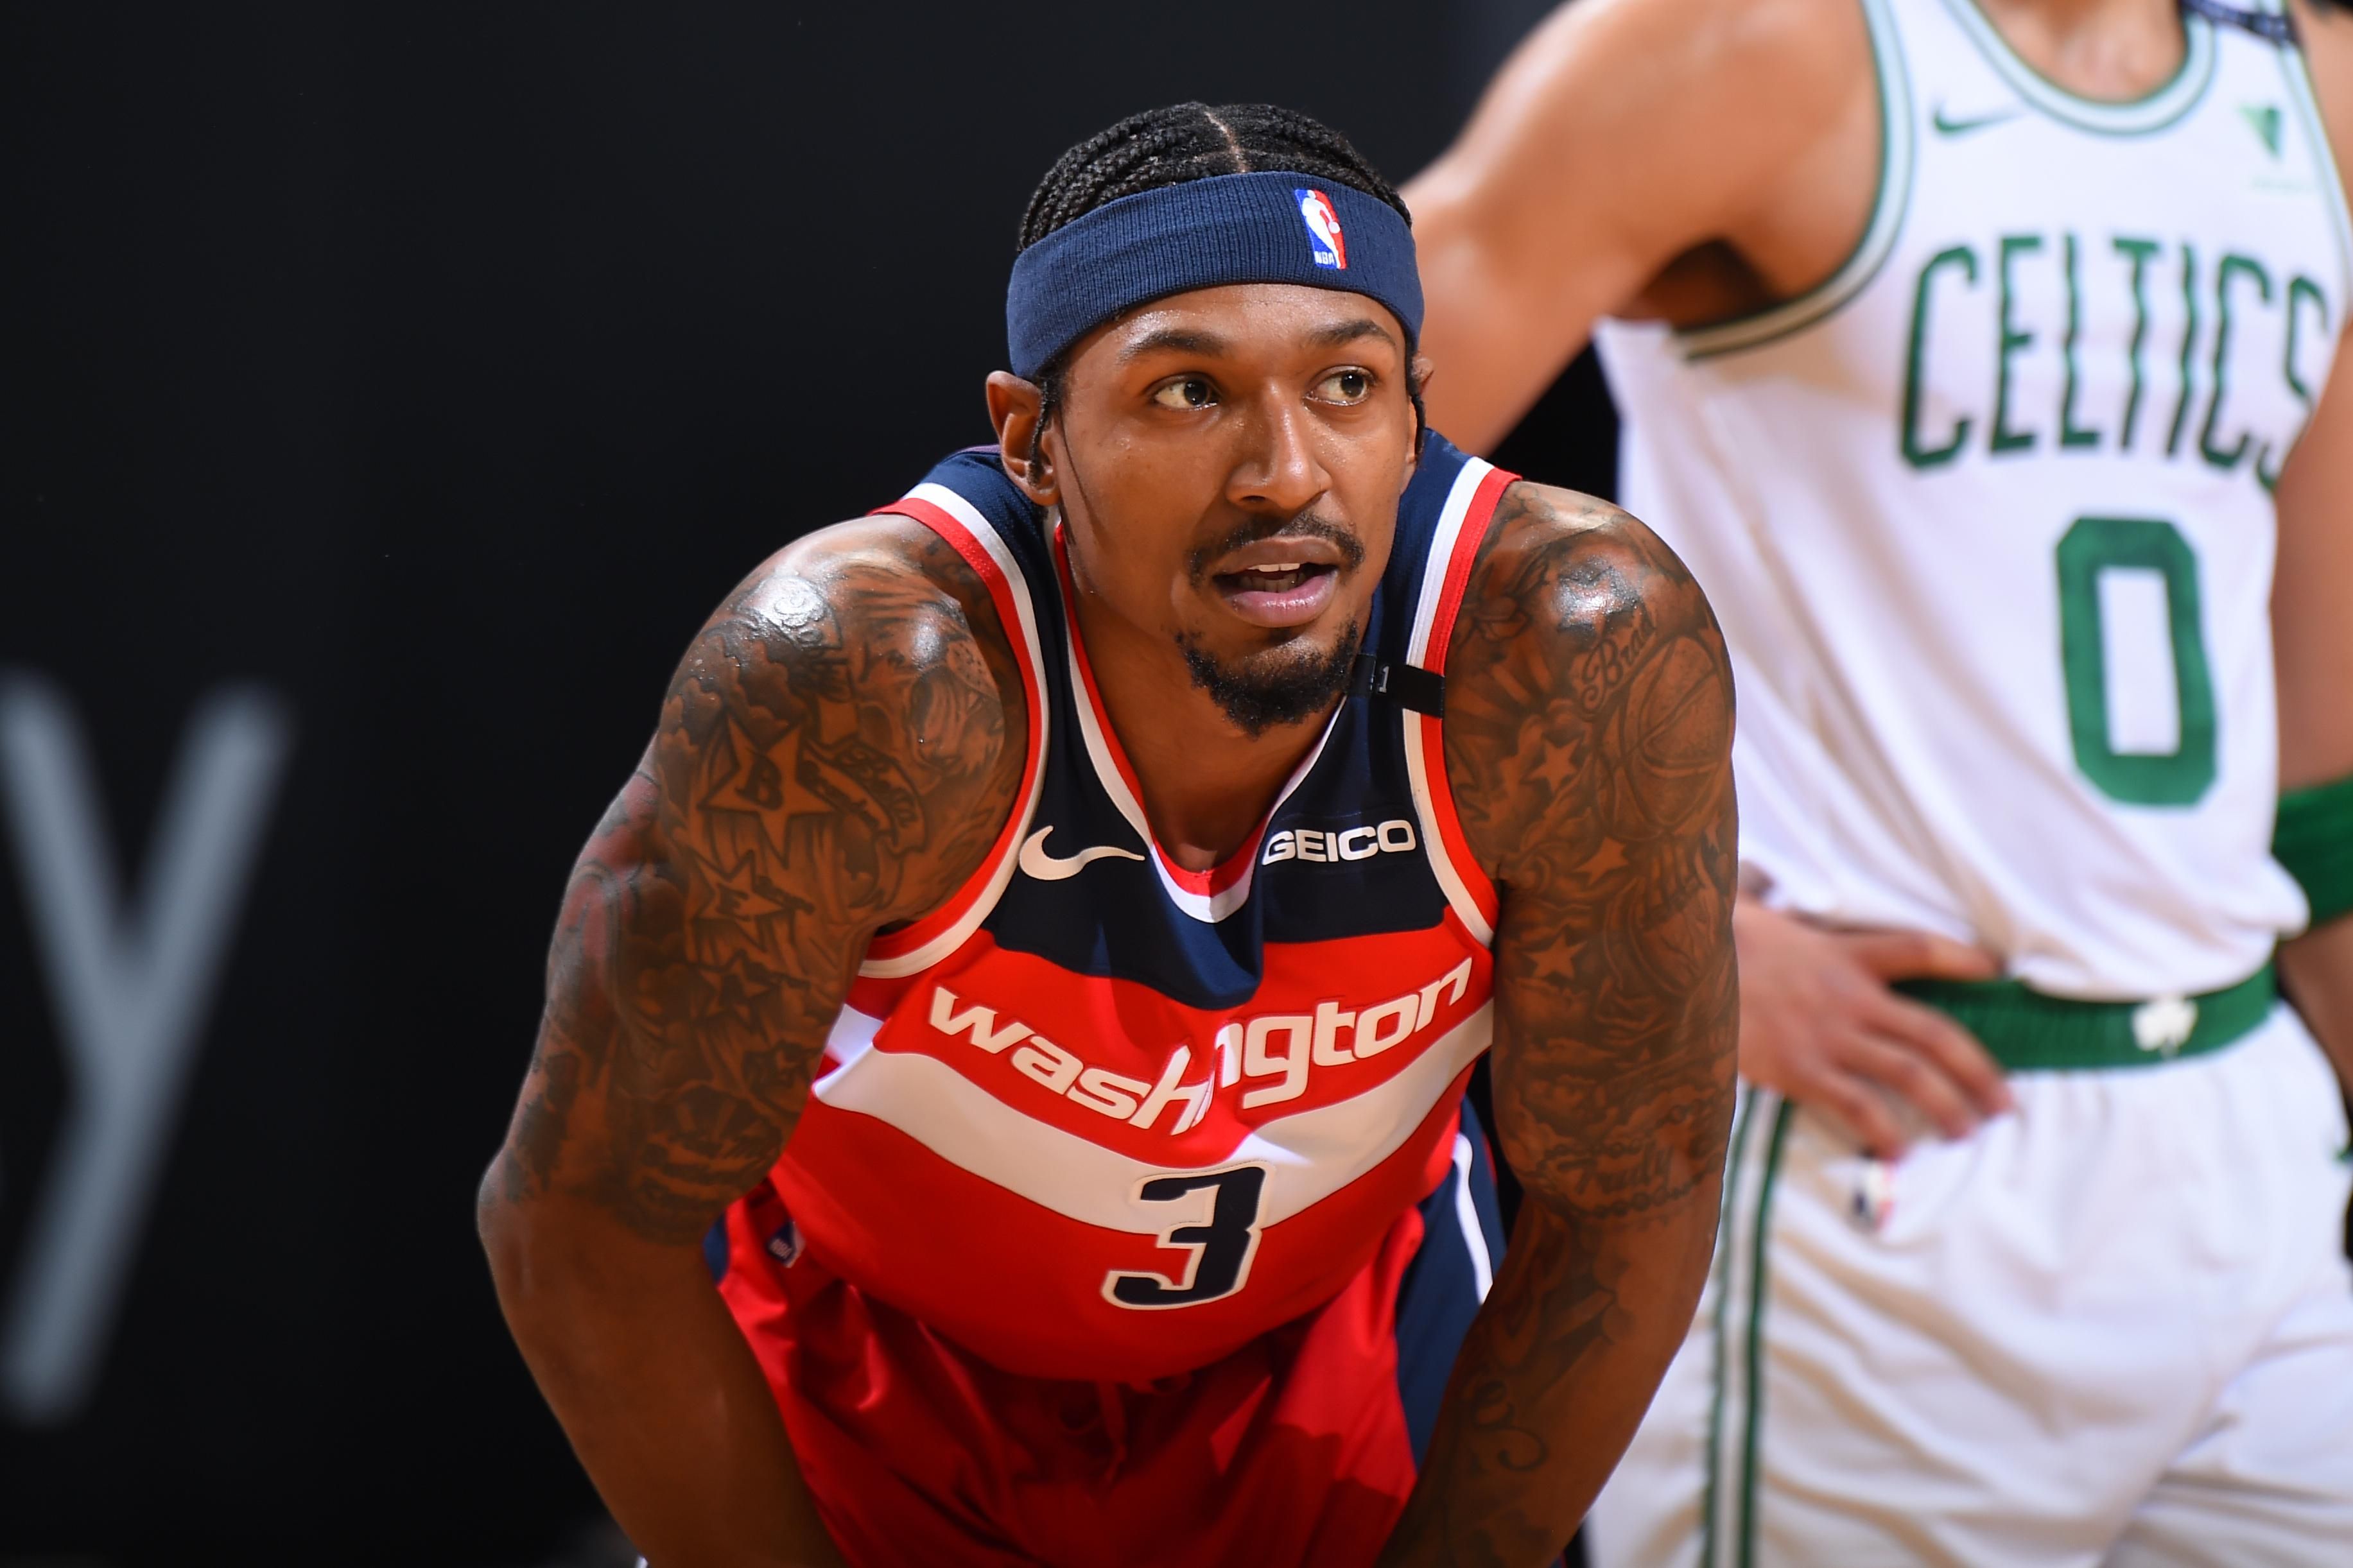 Should Celtics Try To Acquire Bradley Beal From Wizards?